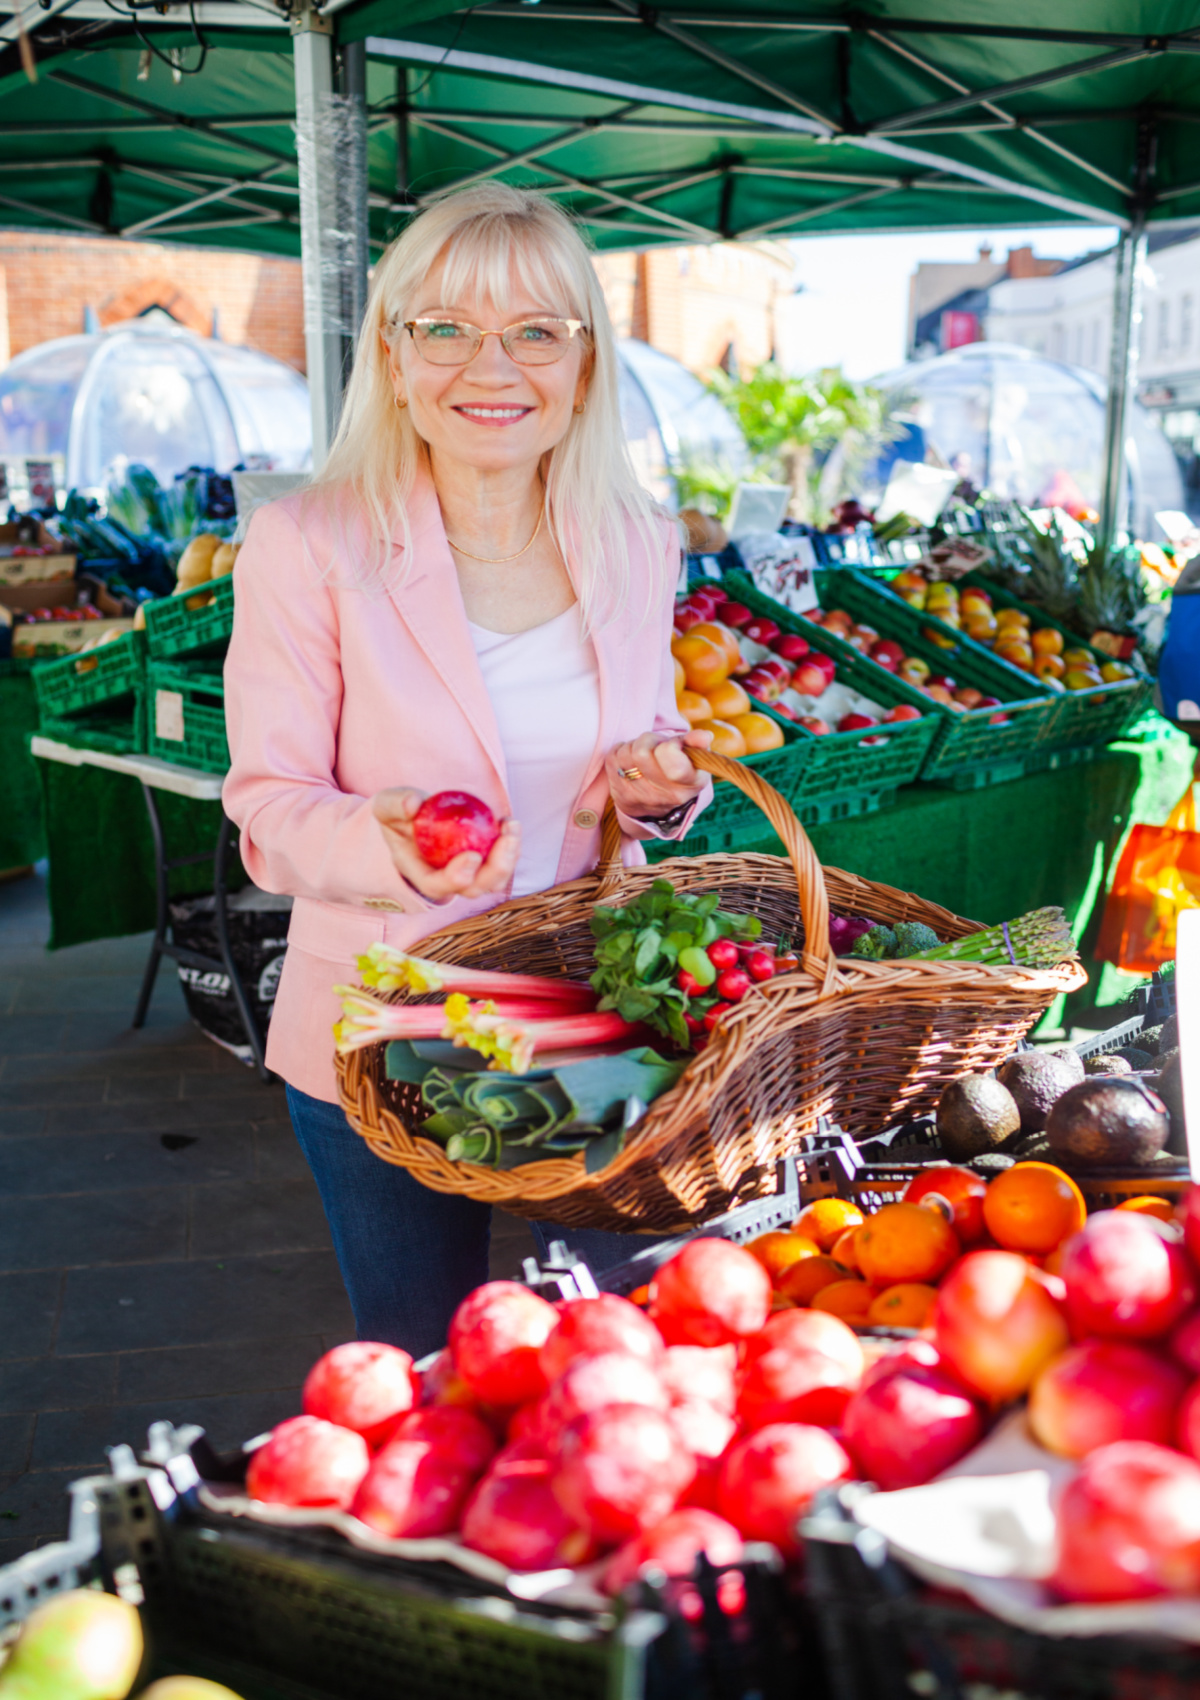 Easy Ways to Eat Less Meat - April J Harris in an outdoor farmer's market choosing fruit and vegetables to put in her market basket